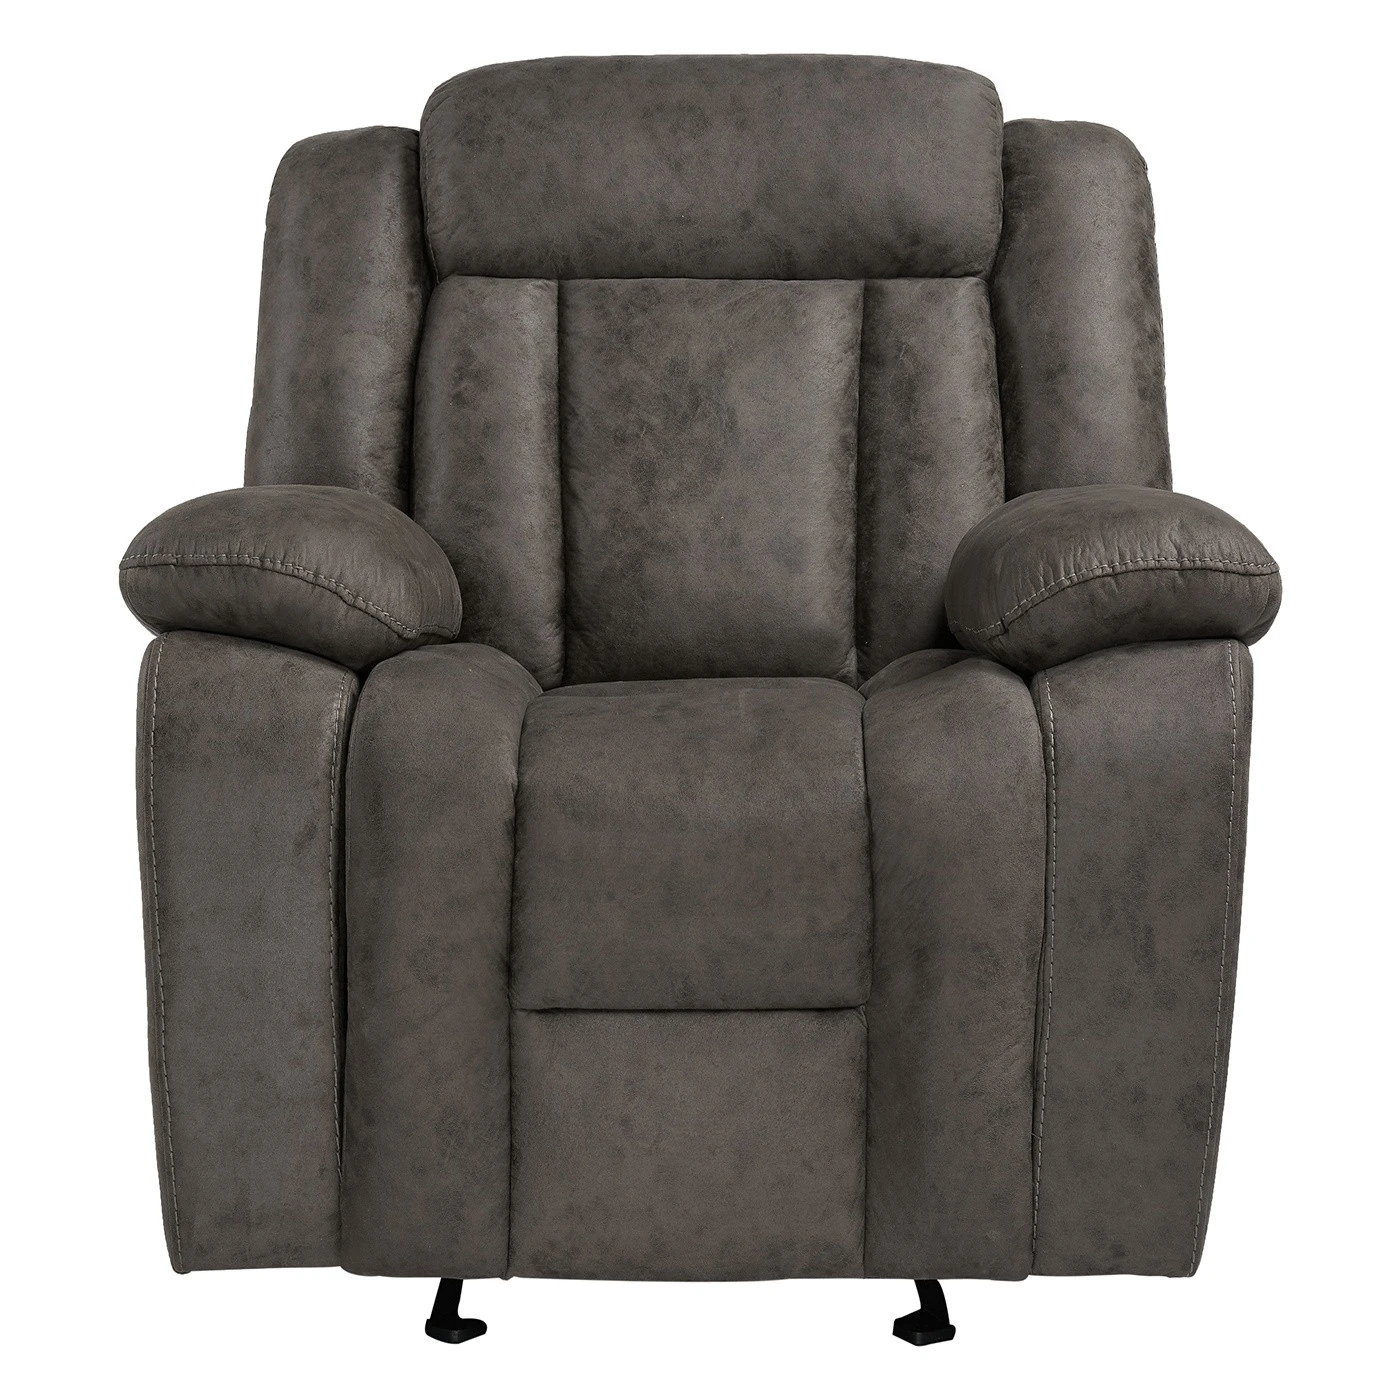 Royal recliner chair mechanism relax leather recliner sofa for home furniture